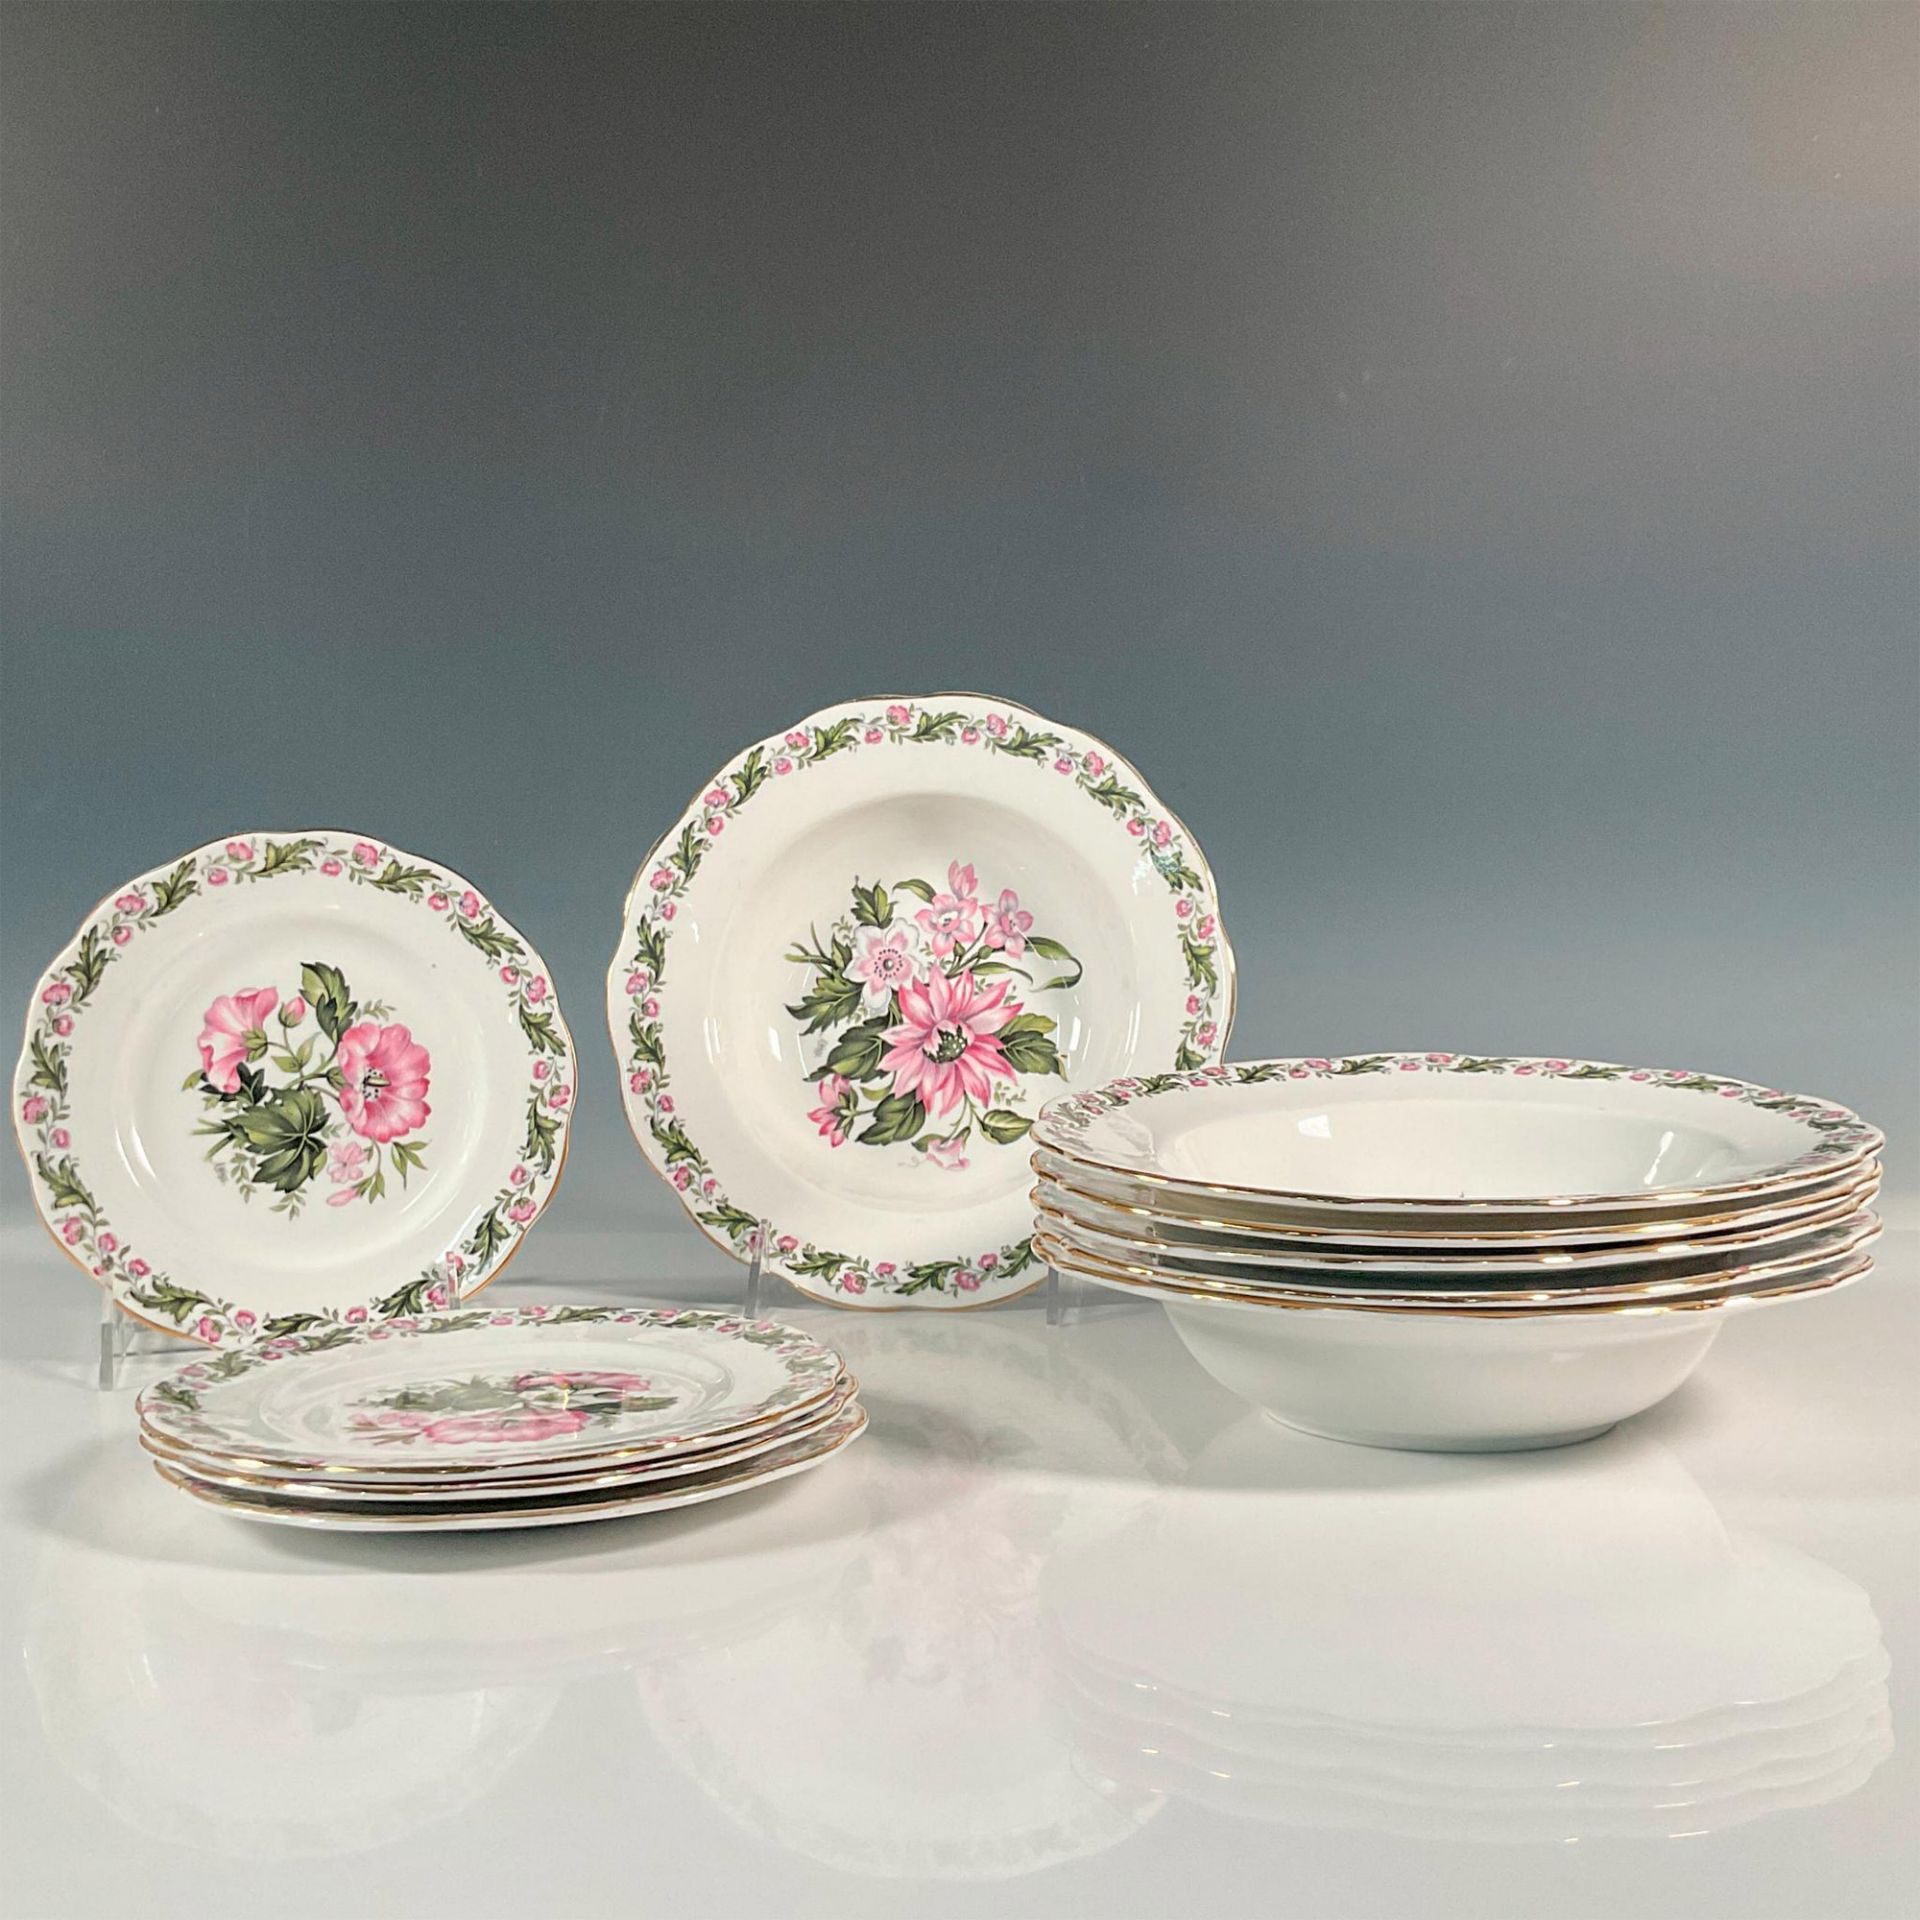 10pc Royal Albert's Plate and Bowl Grouping, Cotswold